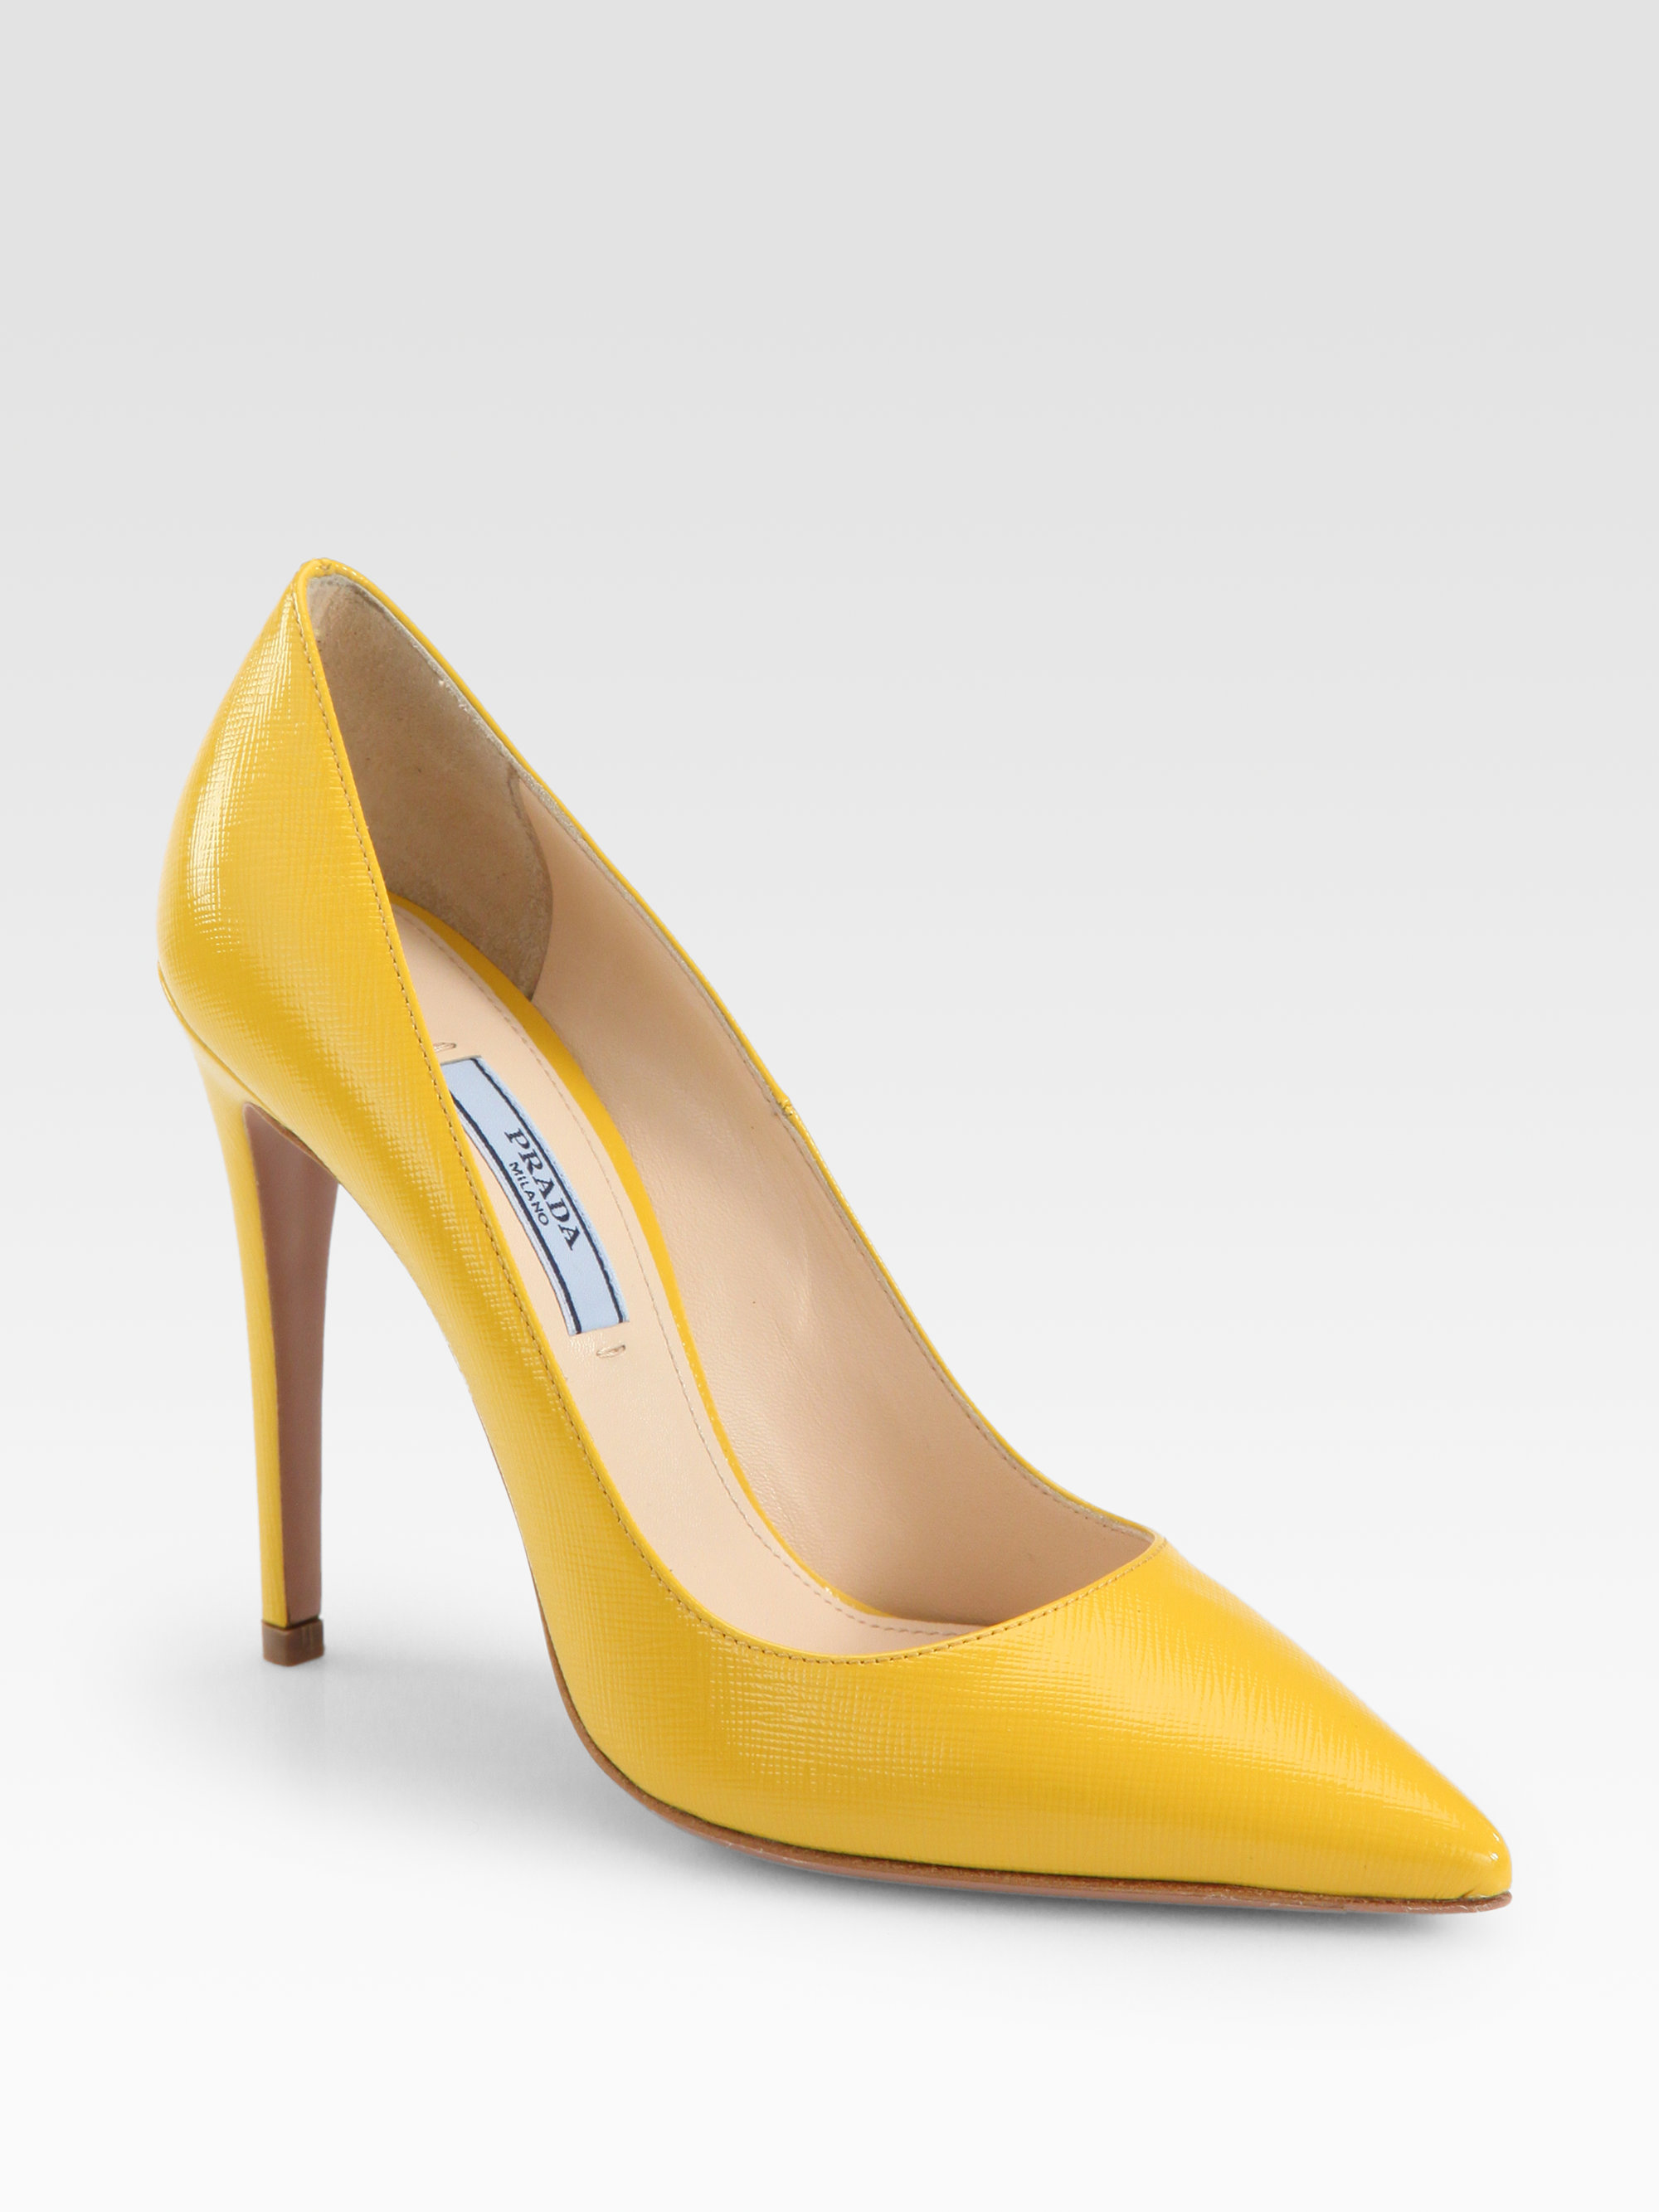 Prada Leather Pumps in Yellow - Lyst